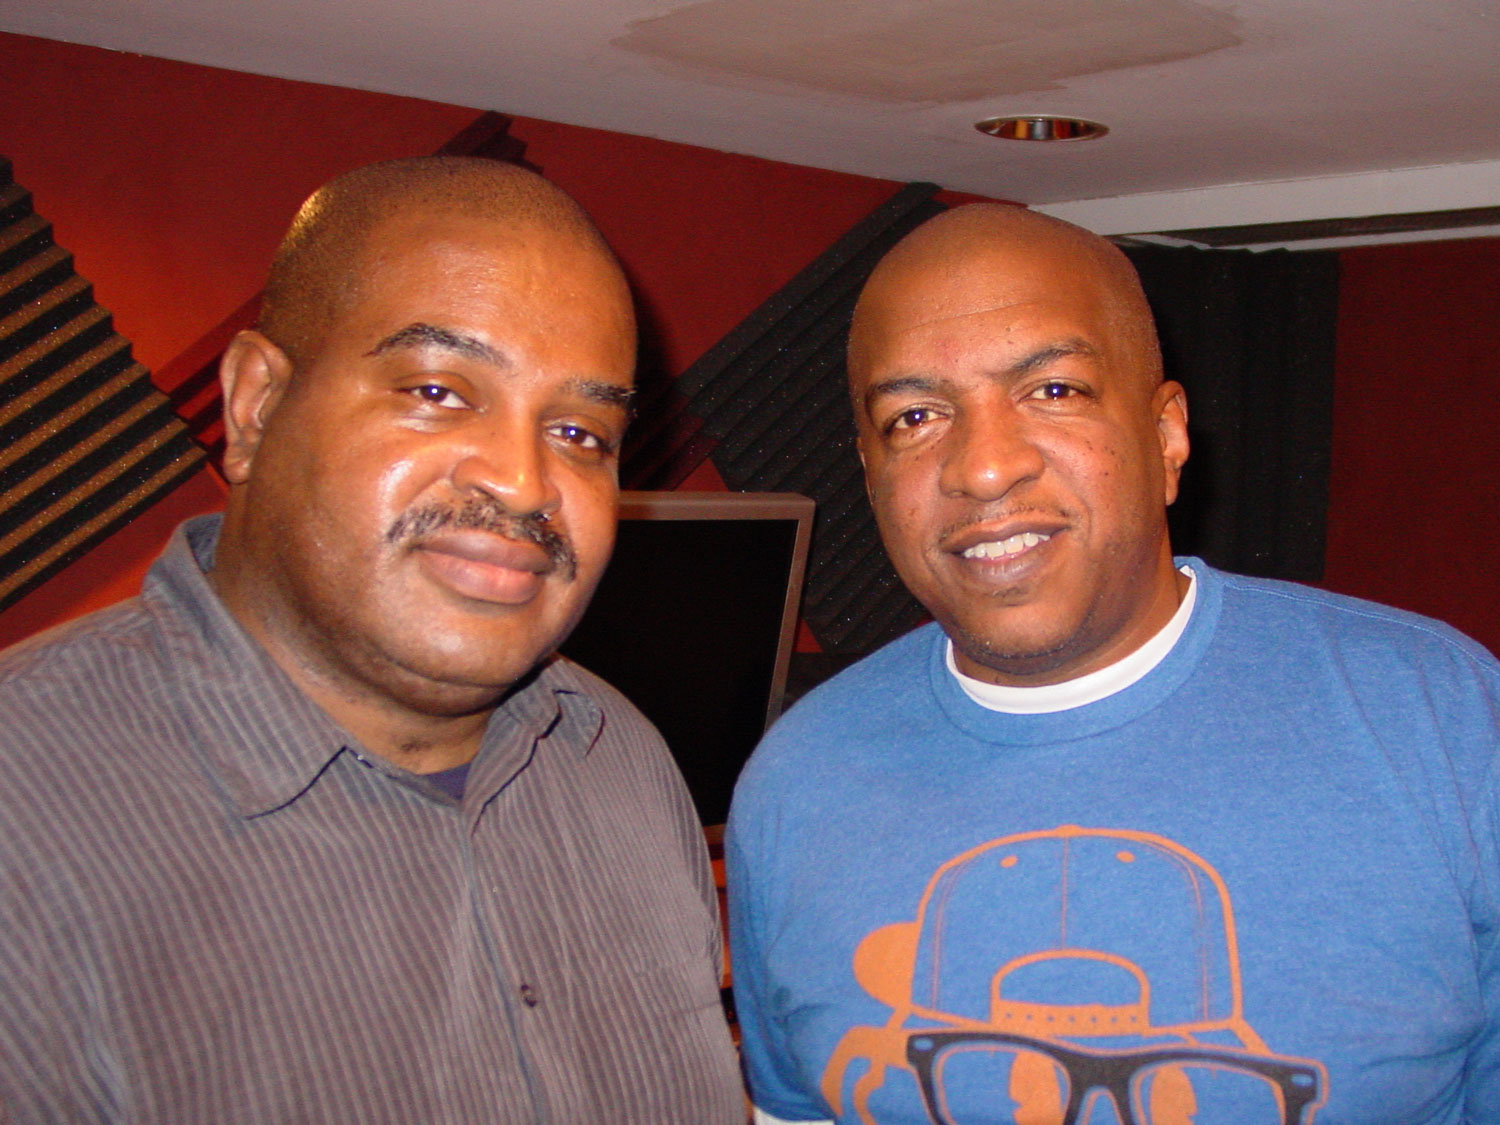 Joe Wize of Indiggo Child Productions and Ralph McDaniels of Video Music Box